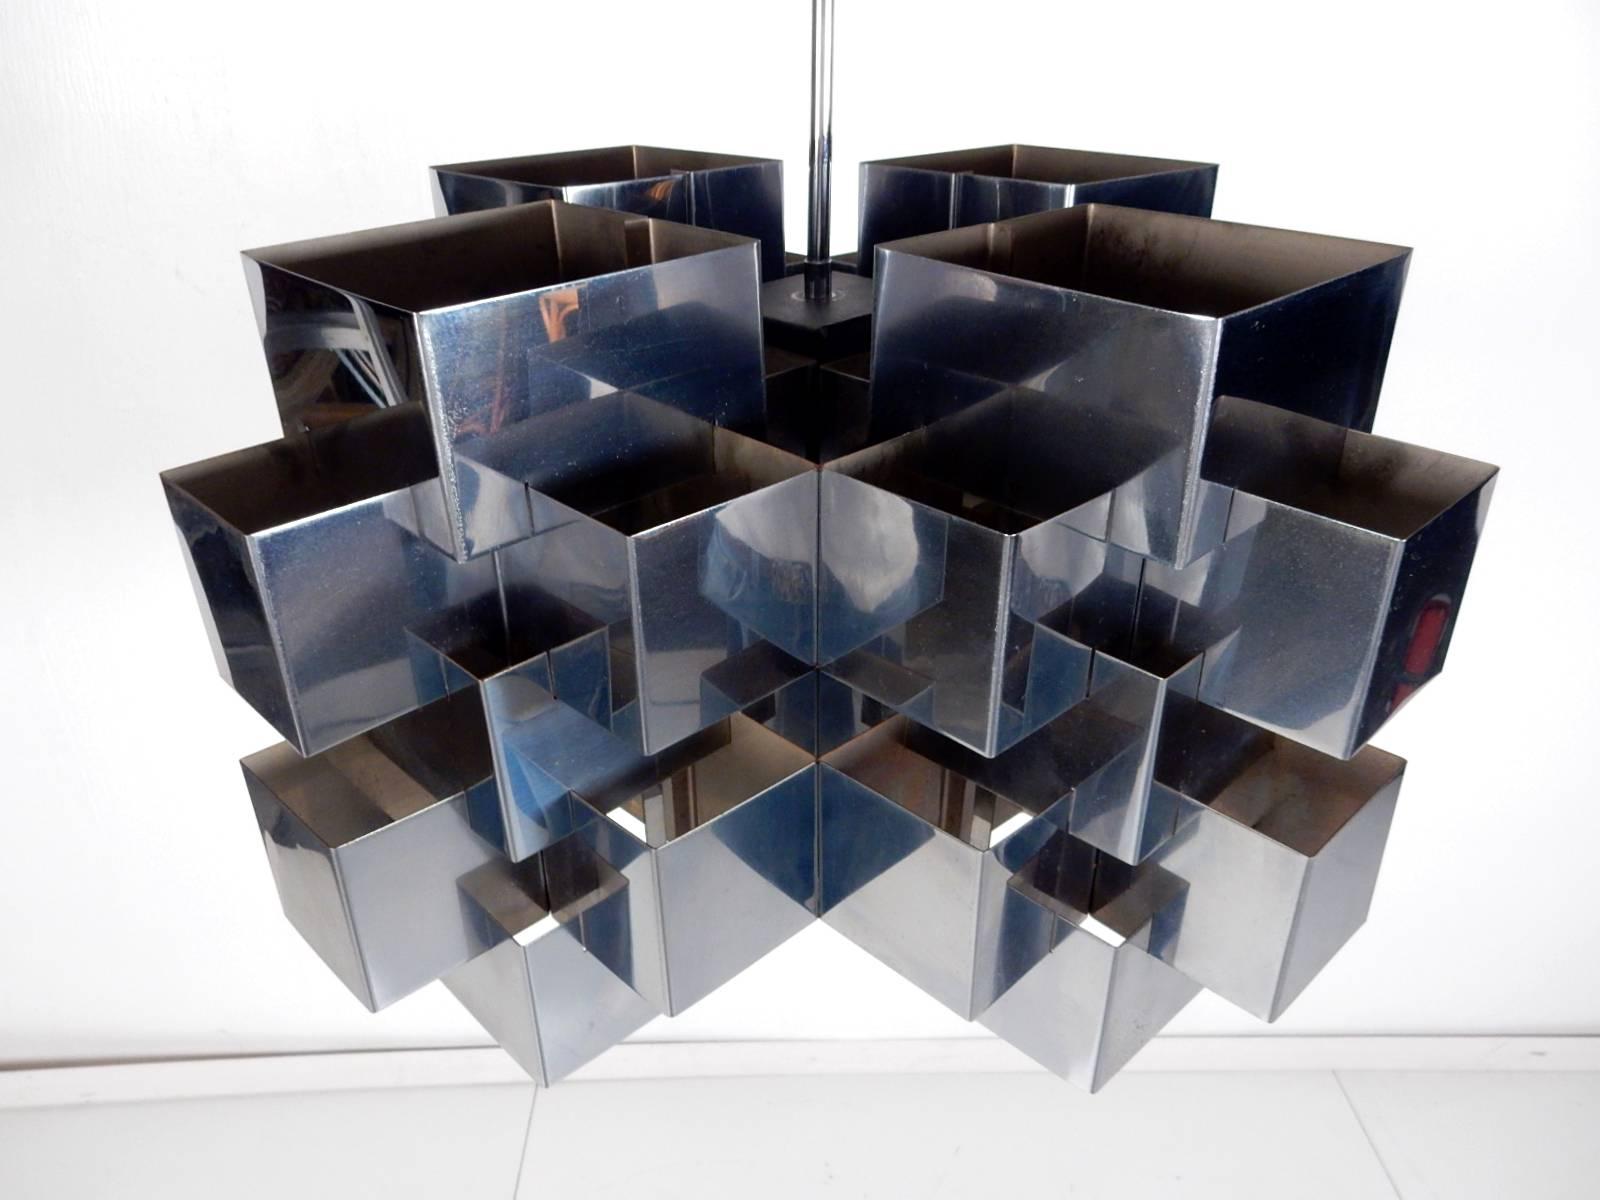 Signed and dated 1975 ‘Cubist’ chandelier by Curtis Jere.
Polished stainless steel (like chrome). Light reflects throughout the panels.
Takes four standard size light bulbs. 24 inch drop from ceiling to bottom edge.